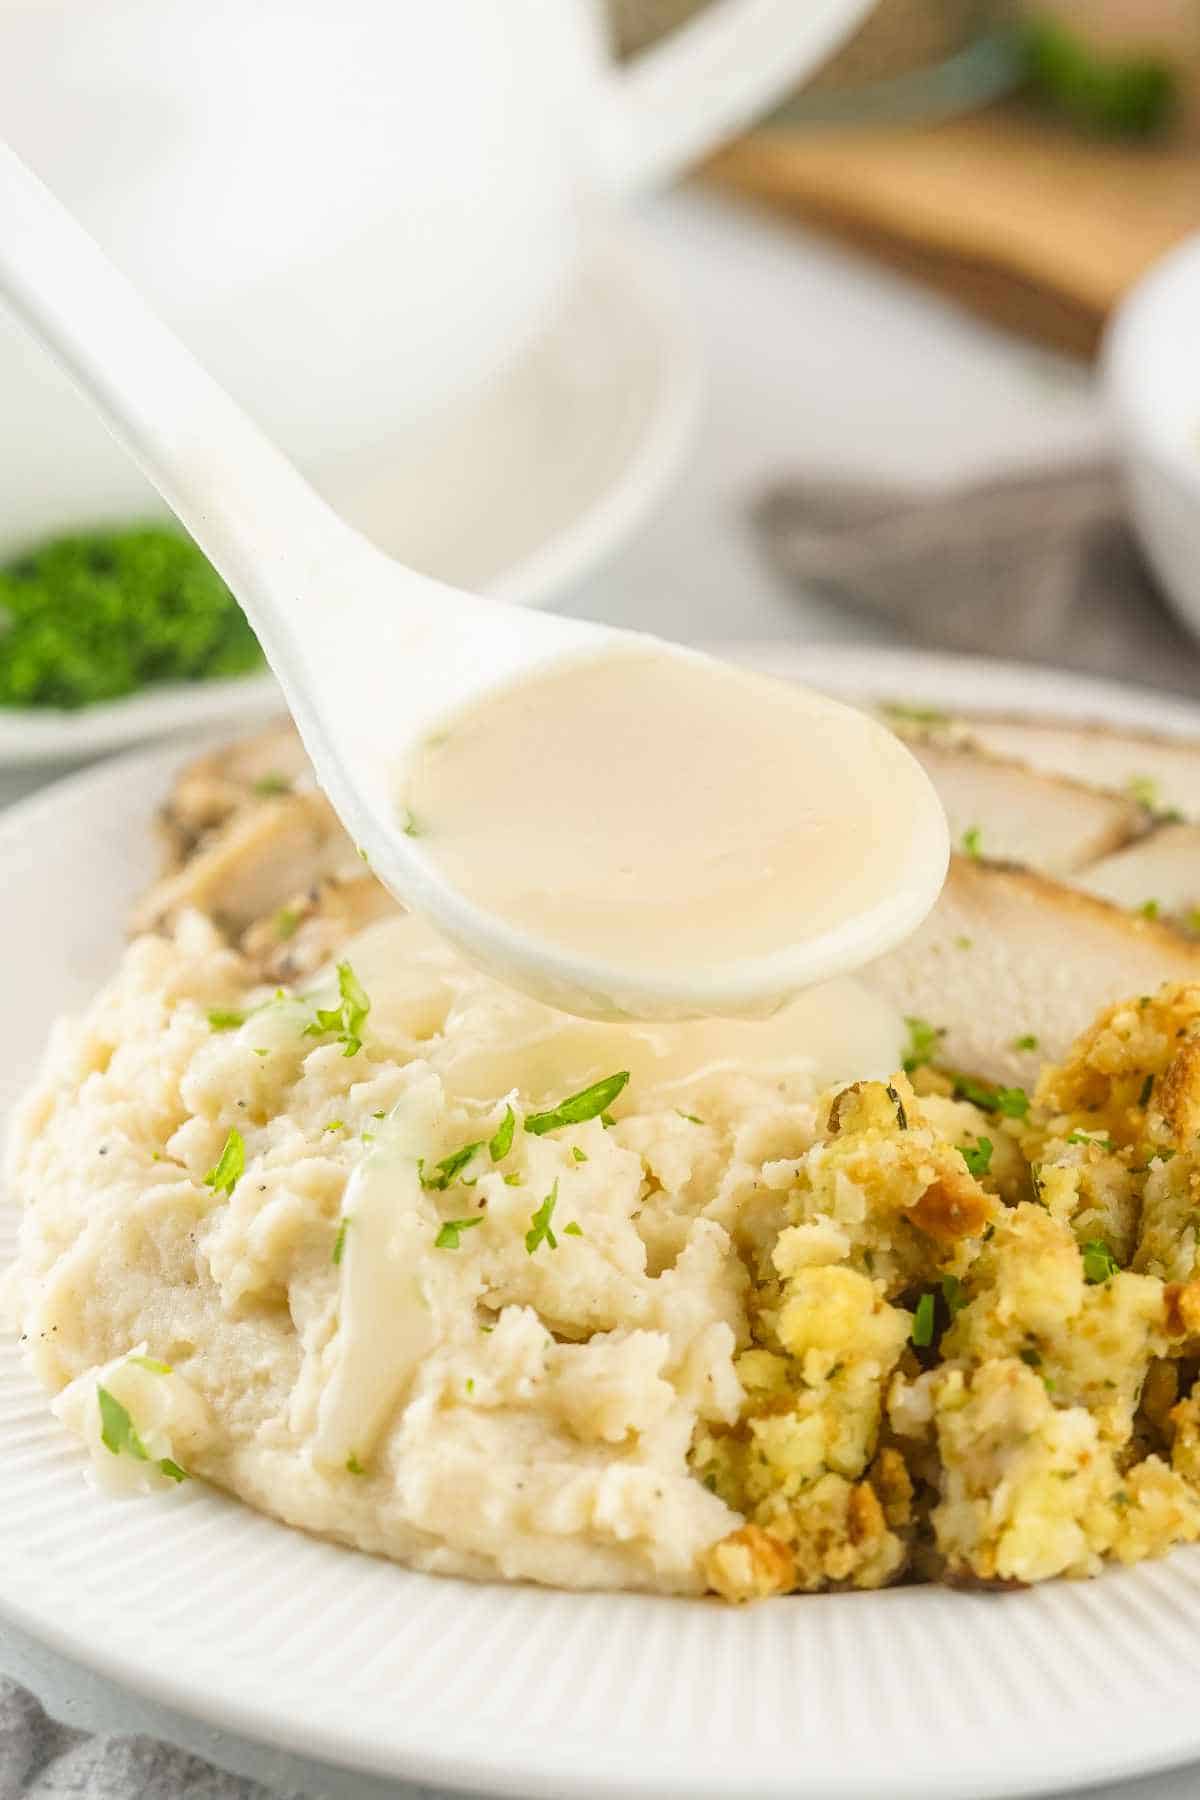 spoonful of gravy drizzled over mashed potatoes and stuffing.